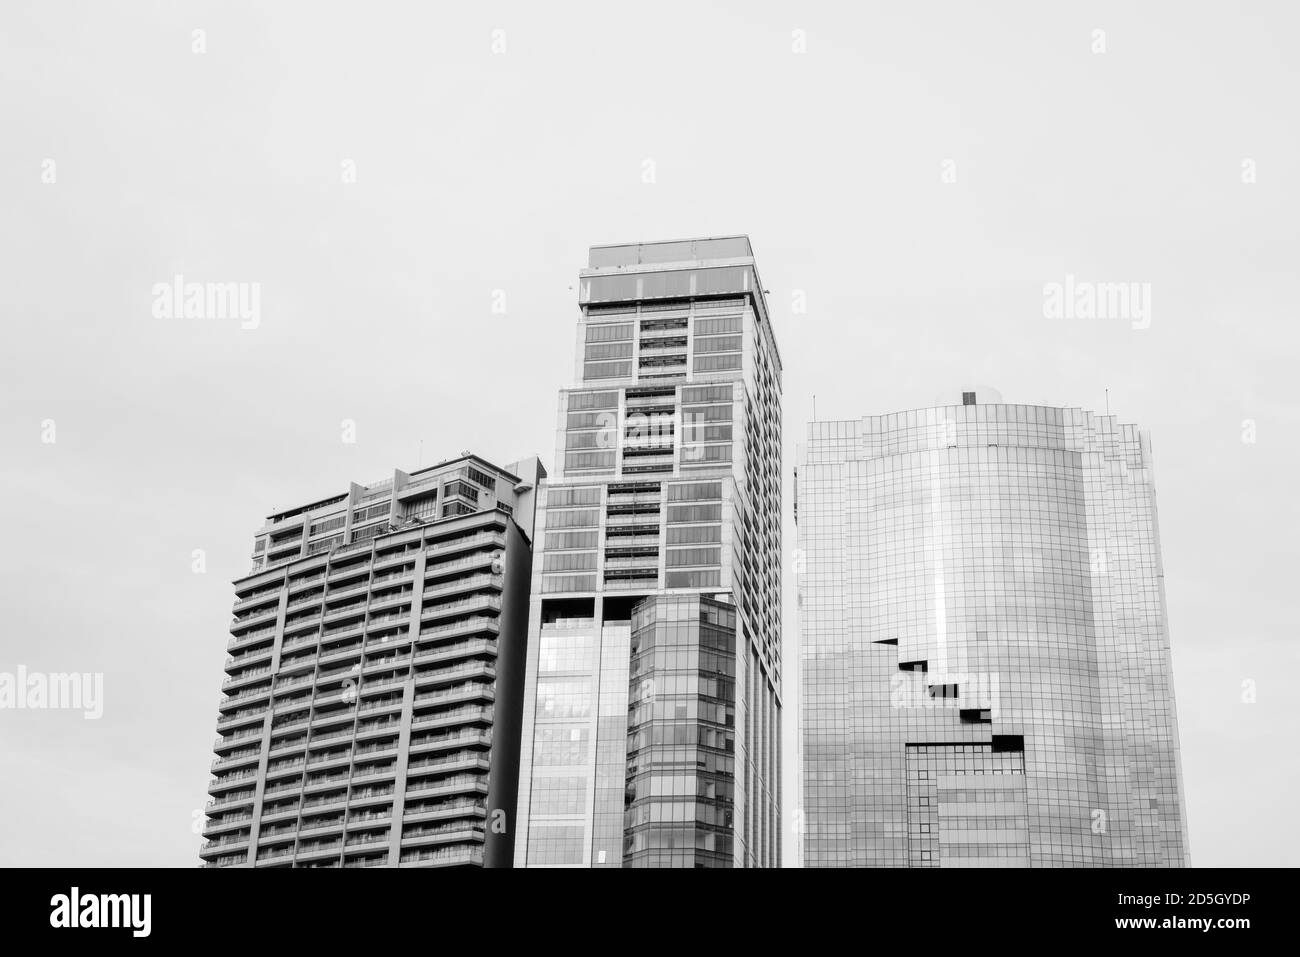 Low Angle View Of Tall Corporate Buildings Stock Photo